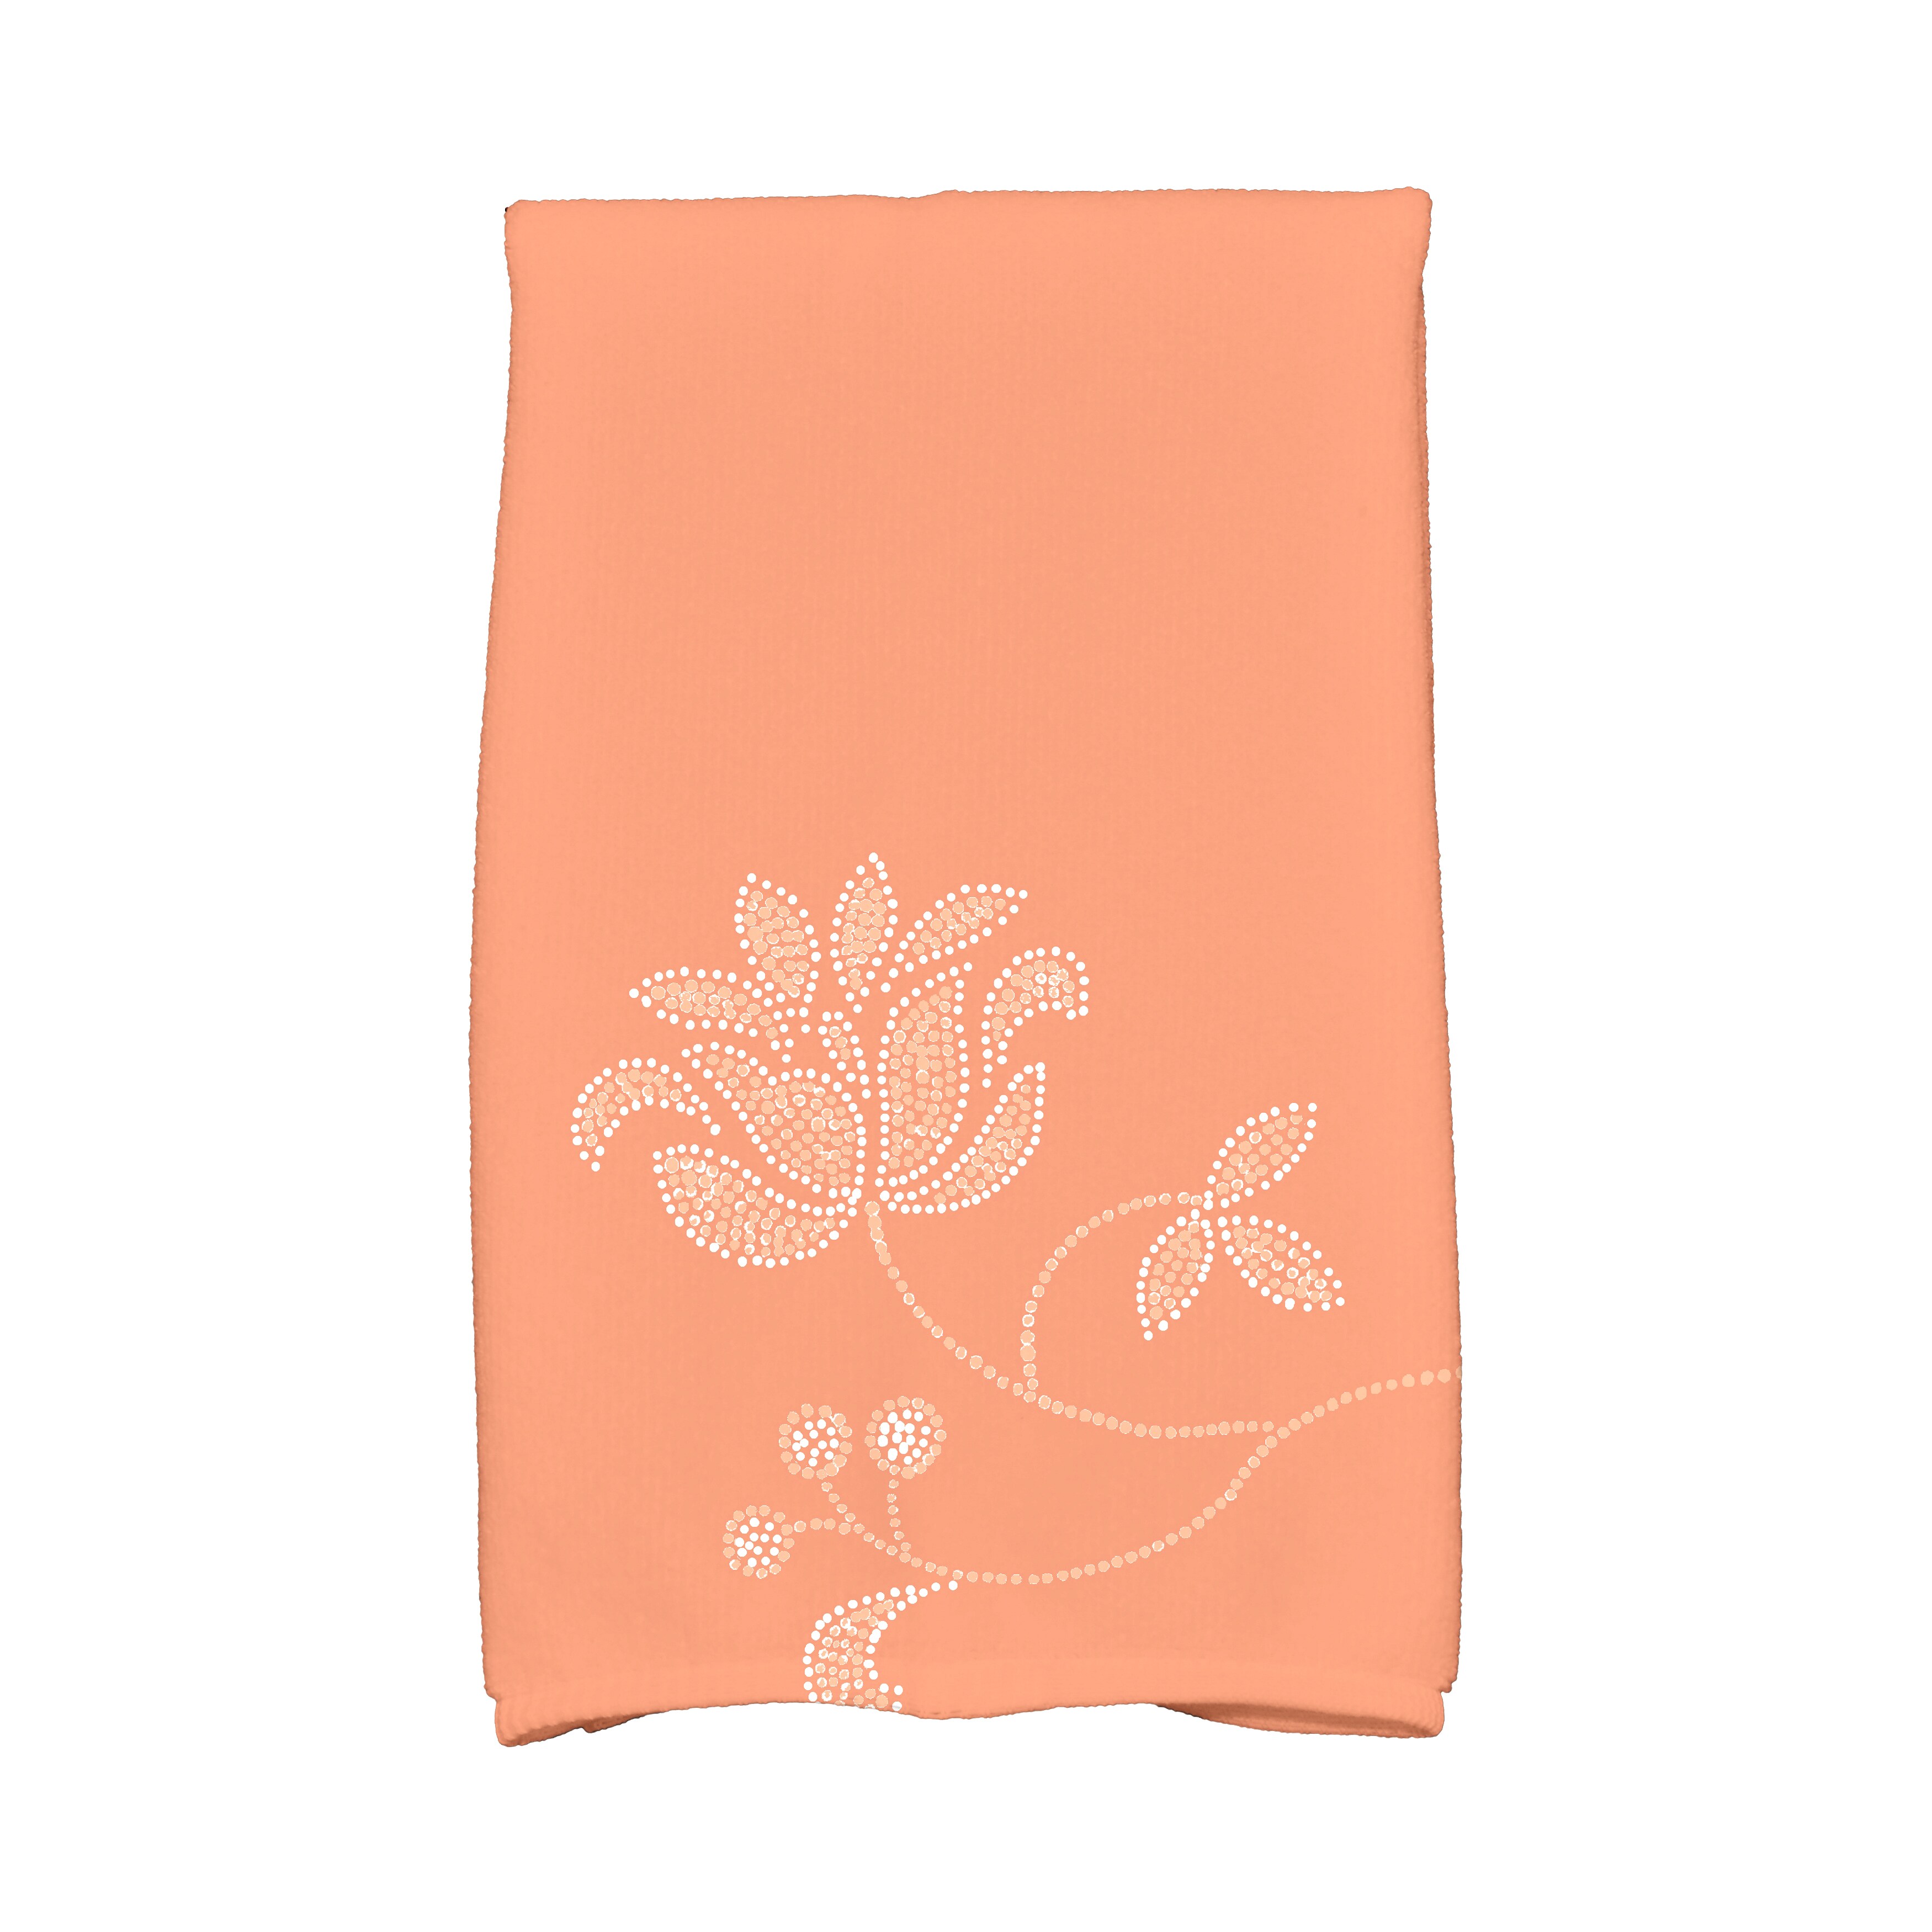 https://ak1.ostkcdn.com/images/products/12310740/16-X-25-inch-Traditional-Flower-Single-Bloom-Floral-Print-Hand-Towel-eaf330ce-a9ce-497a-9ea5-f834e4207f6d.jpg